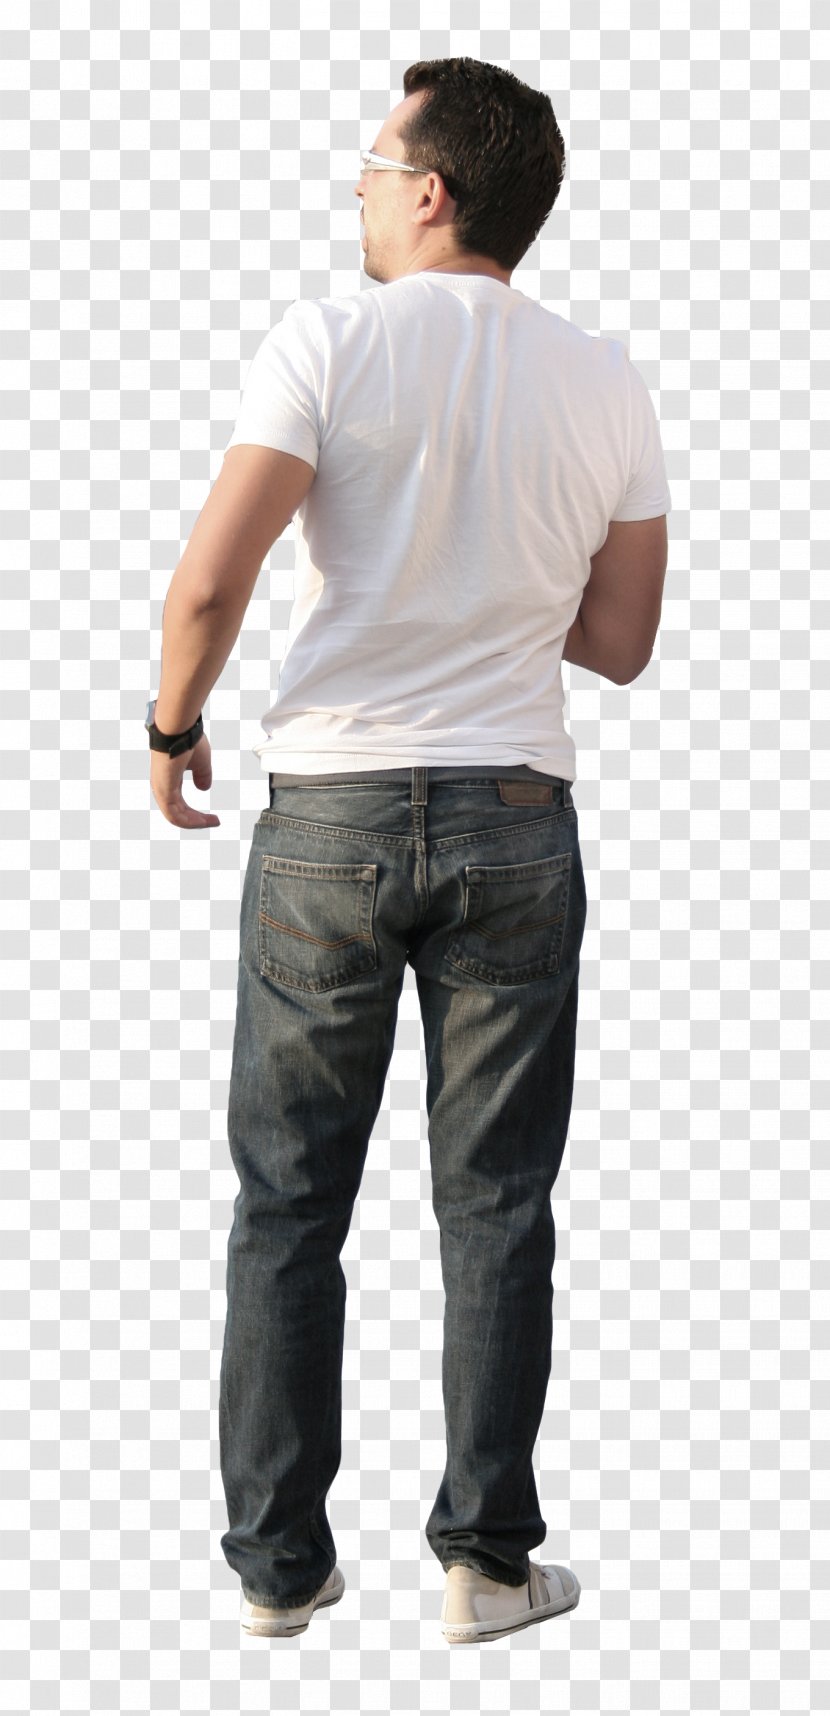 T-shirt Pants Sleeve Jeans Pocket - Standing - White Tshirt Transparent PNG